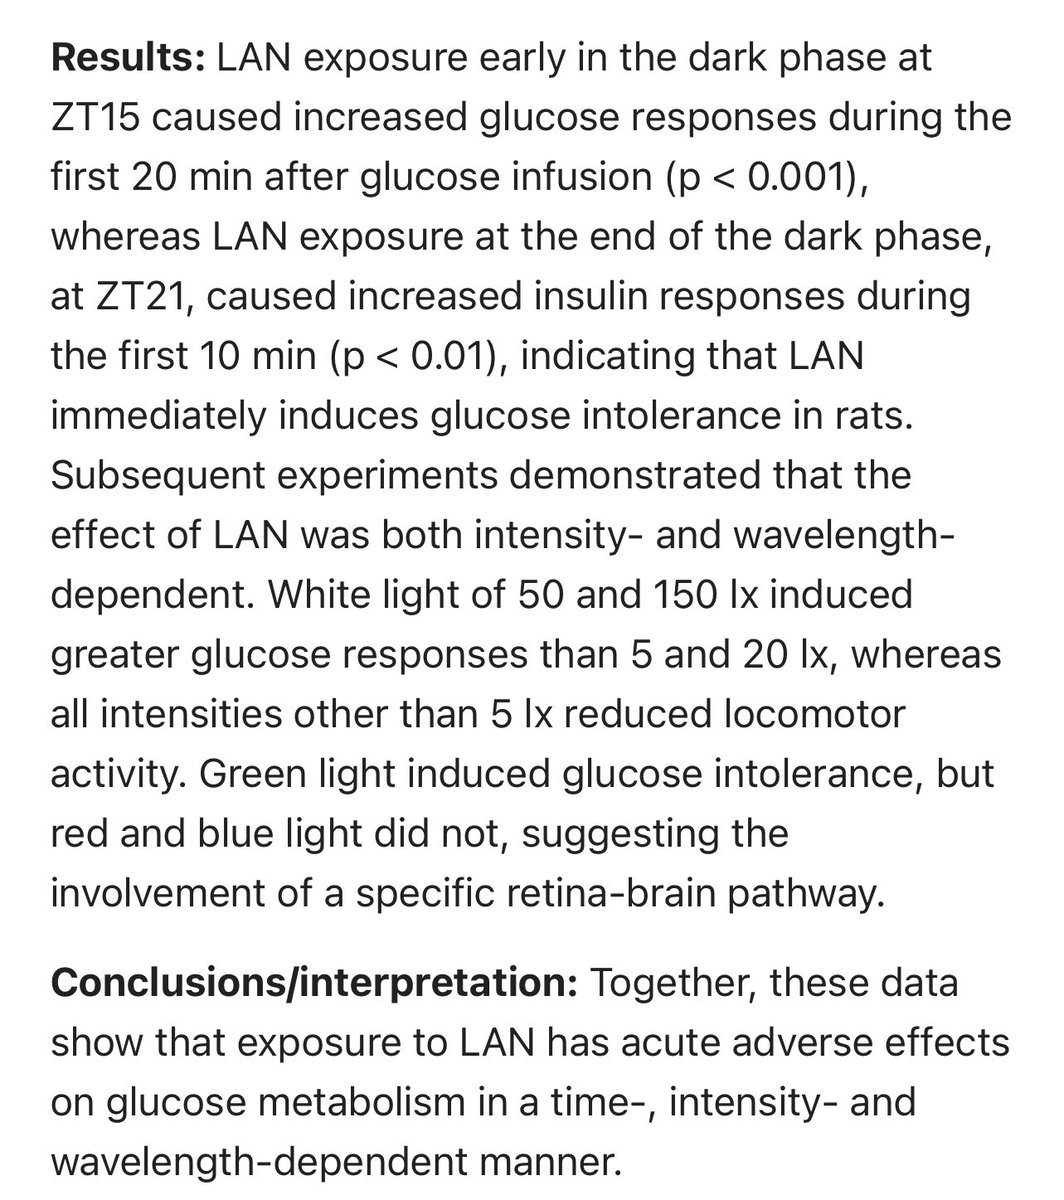 Light at night acutely impairs glucose tolerance in a time-, intensity- and wavelength-dependent manner in rats  https://www.ncbi.nlm.nih.gov/labs/pmc/articles/PMC5487588/Nocturnal rats again. Common LED and fluorescent lights have green light spectrum = glucose intolerance.